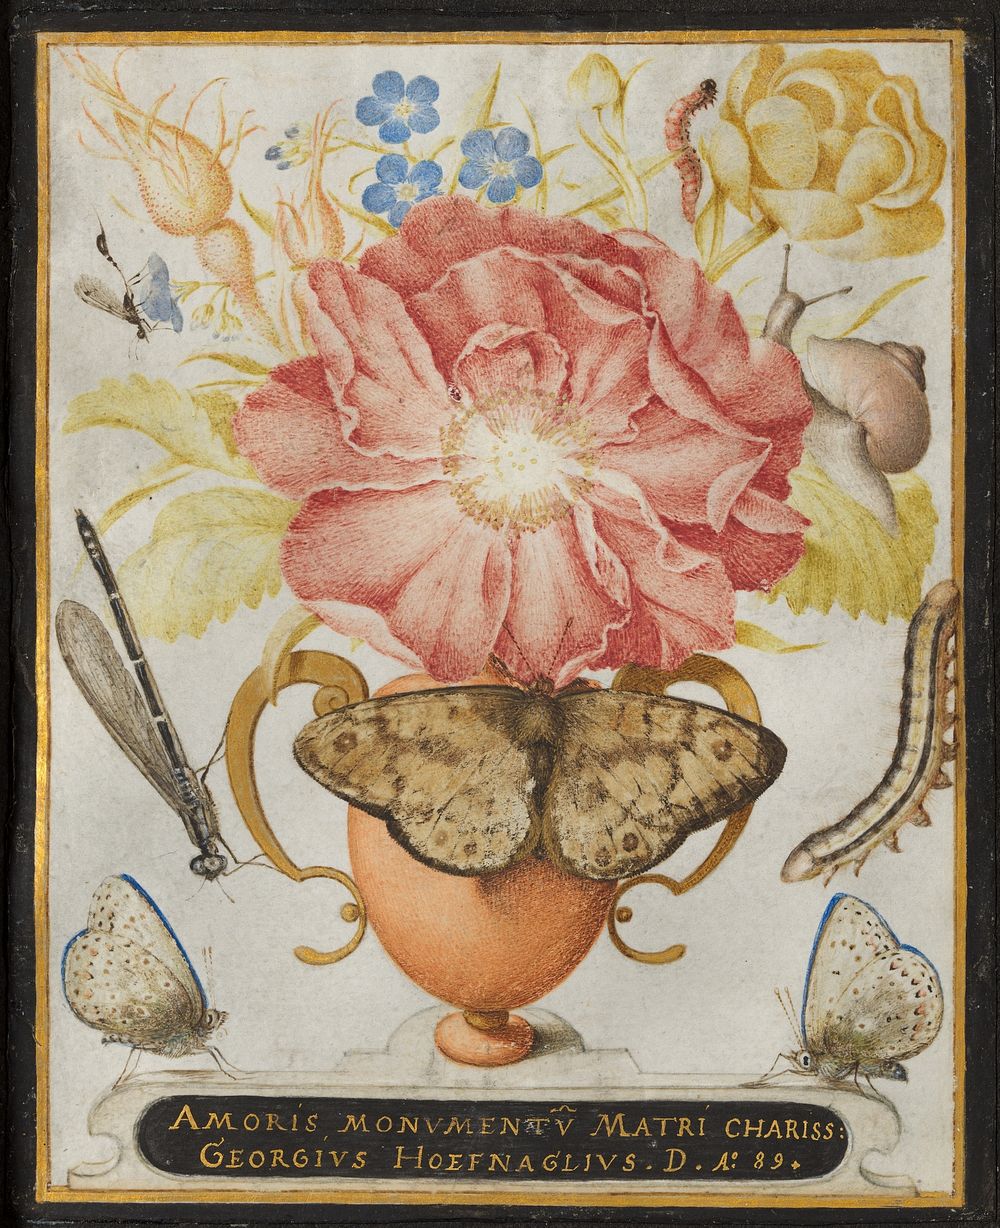 Still Life with Flowers, a Snail and Insects (1589) painting in high resolution by Joris Hoefnagel.  